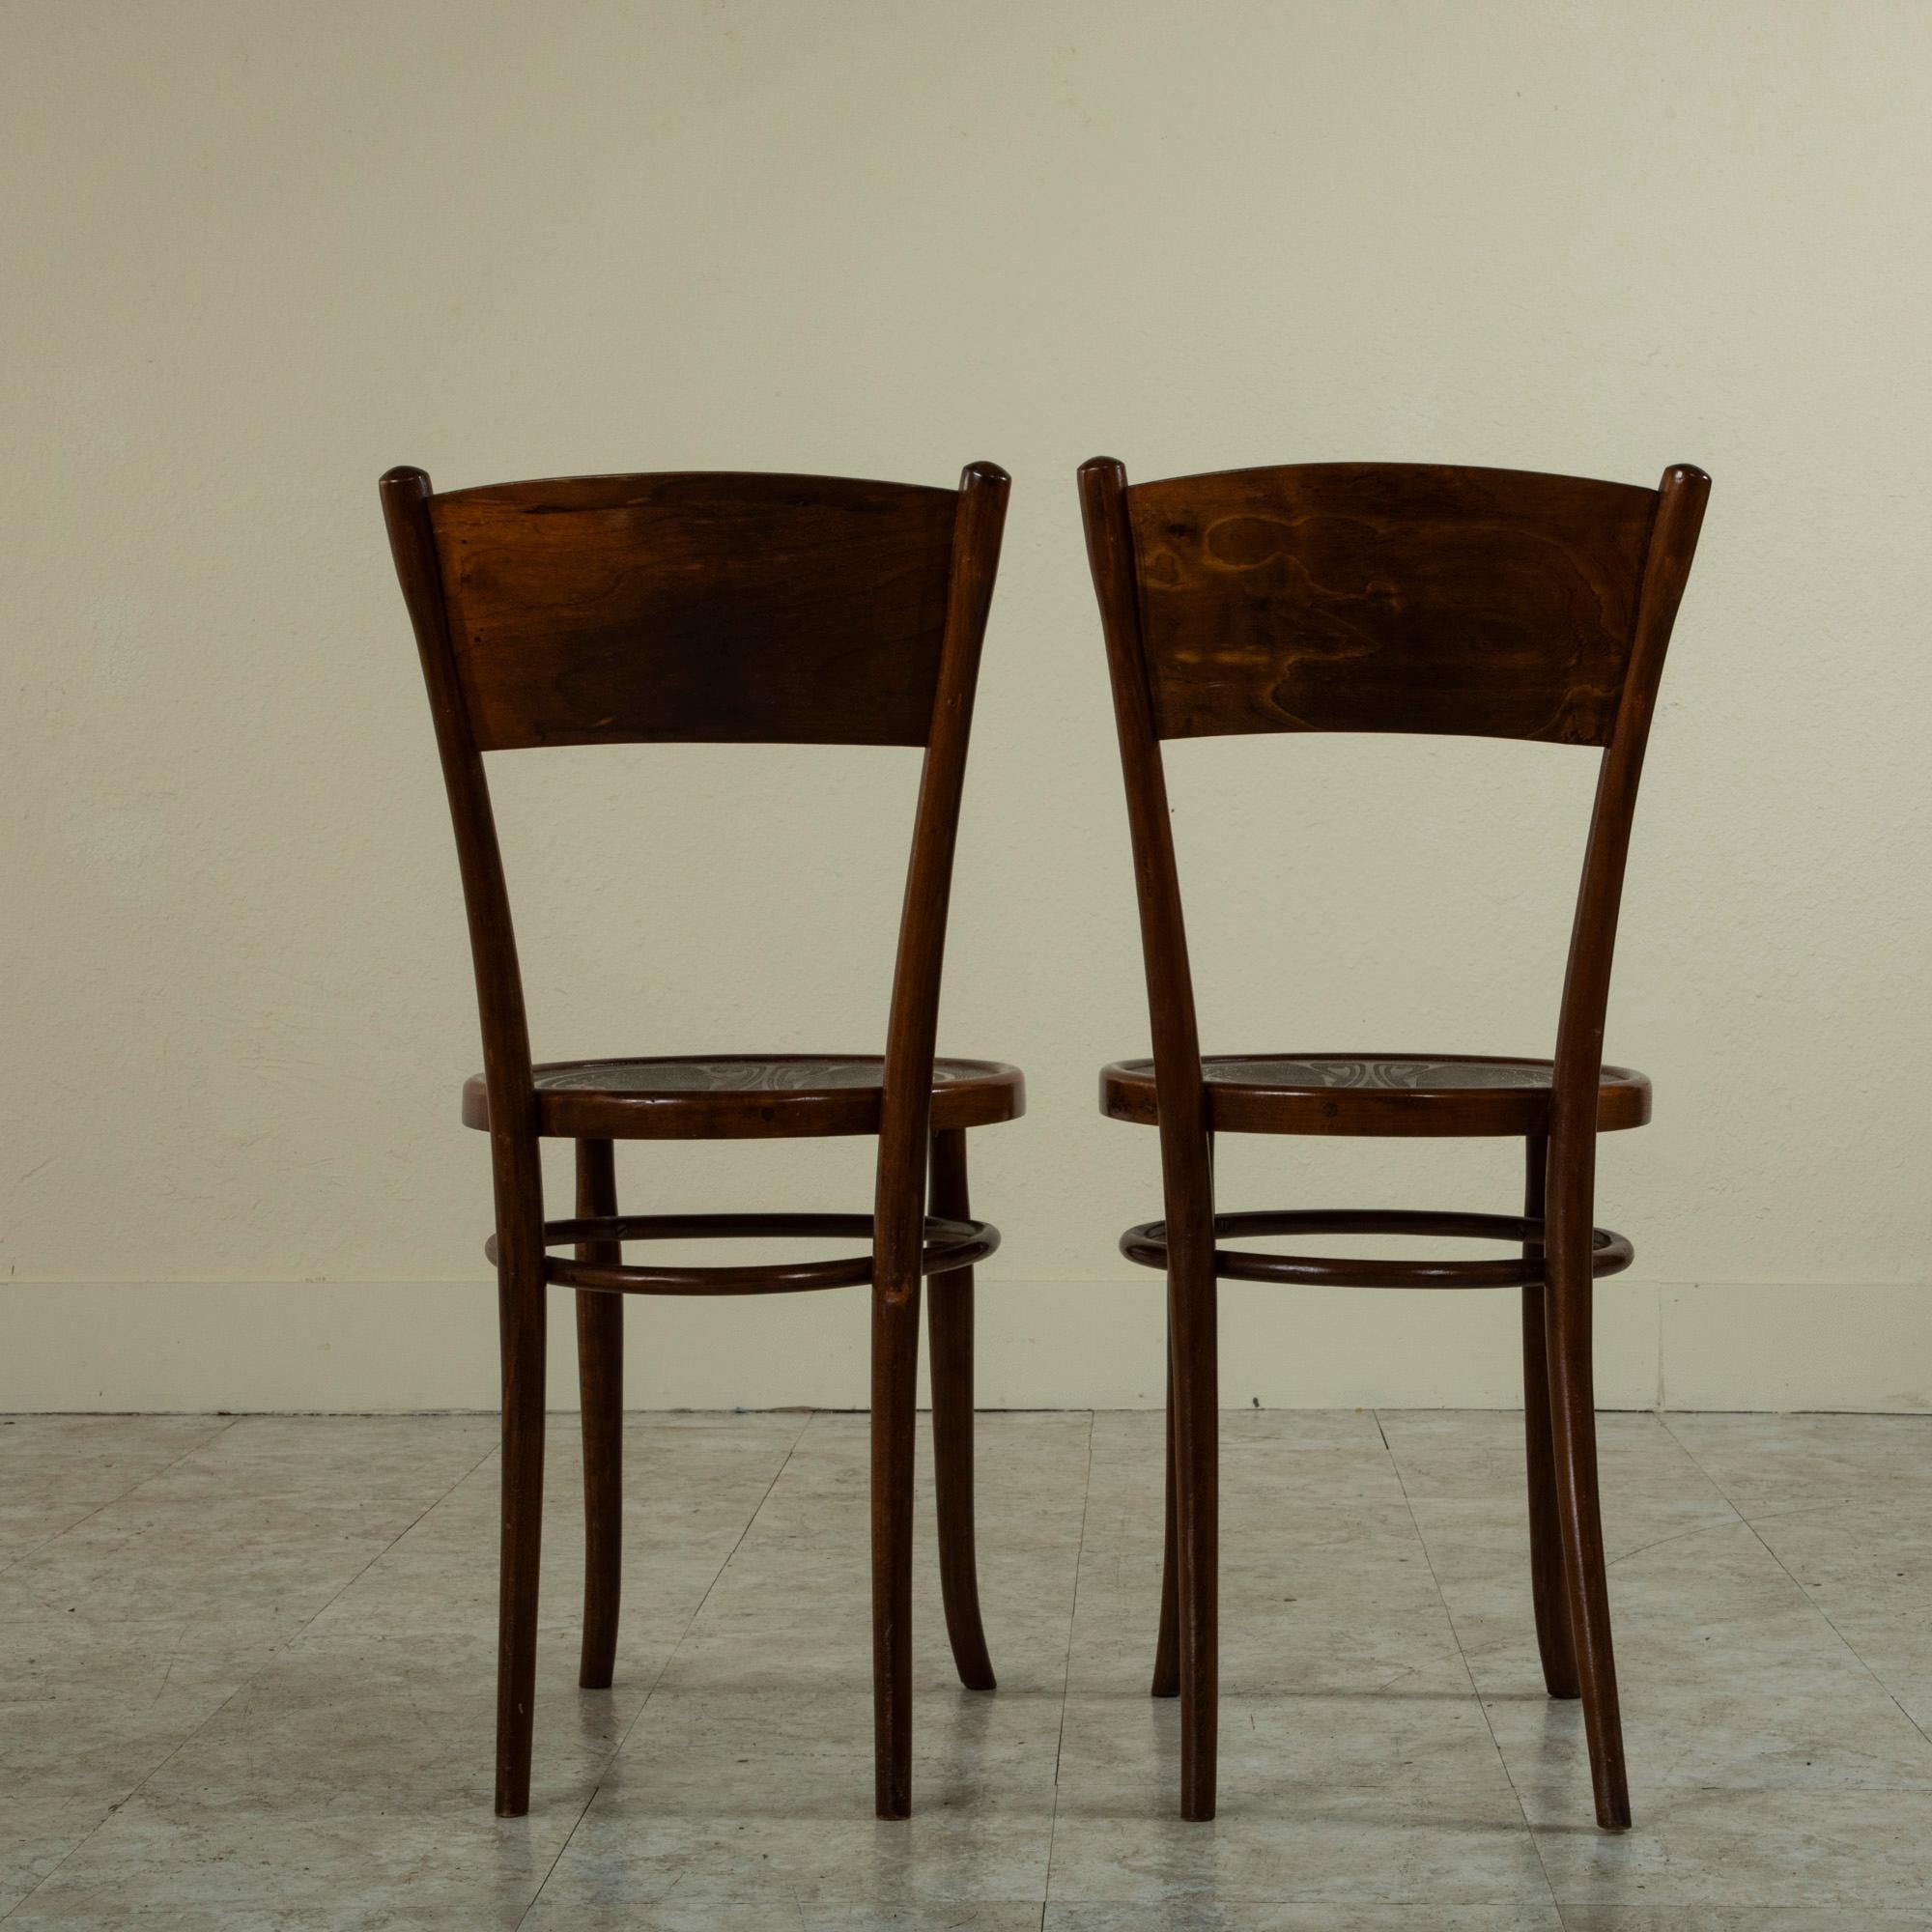 Pair of French Art Nouveau Period Bentwood Bistro Chairs, Pressed Seats, c. 1900 1